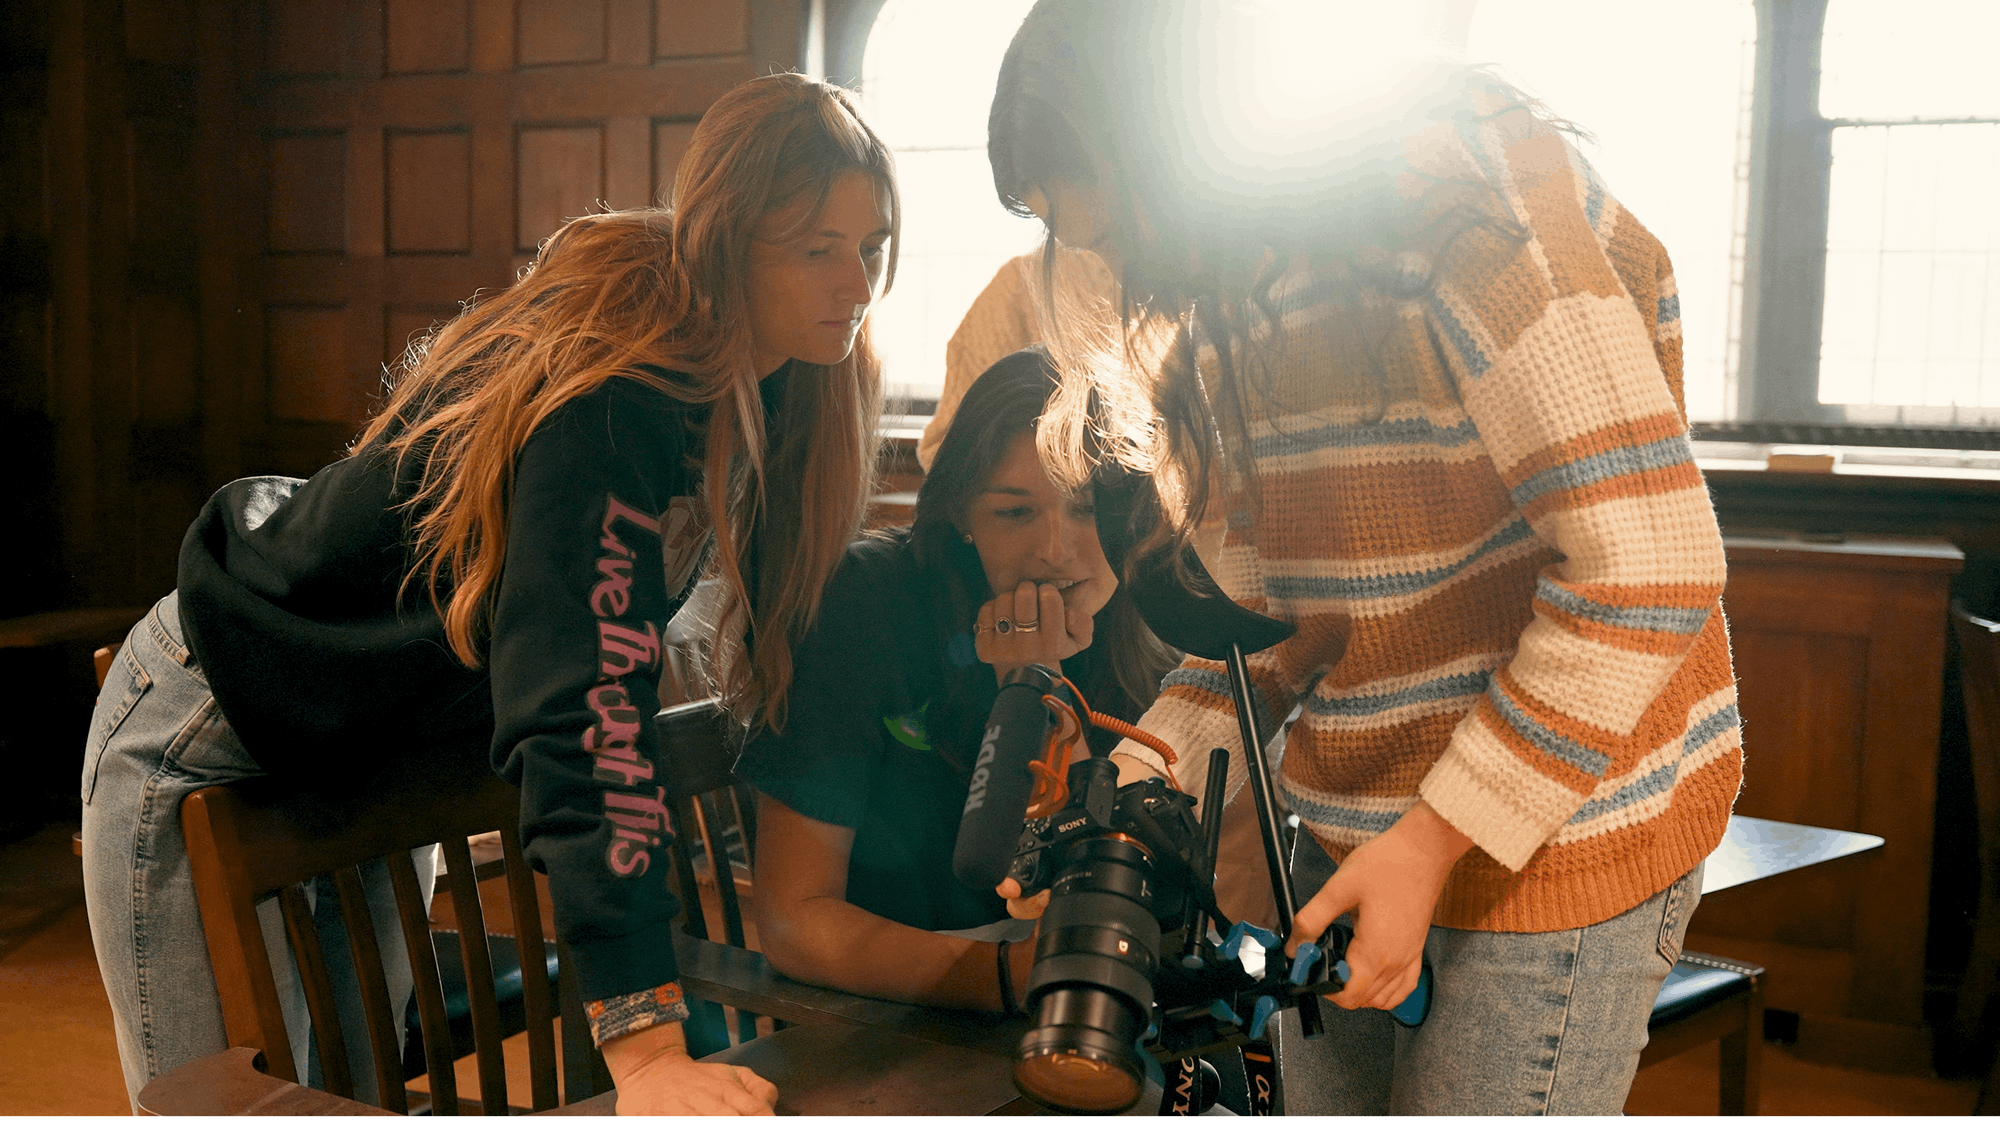 Three female students look at a recording in a camera.